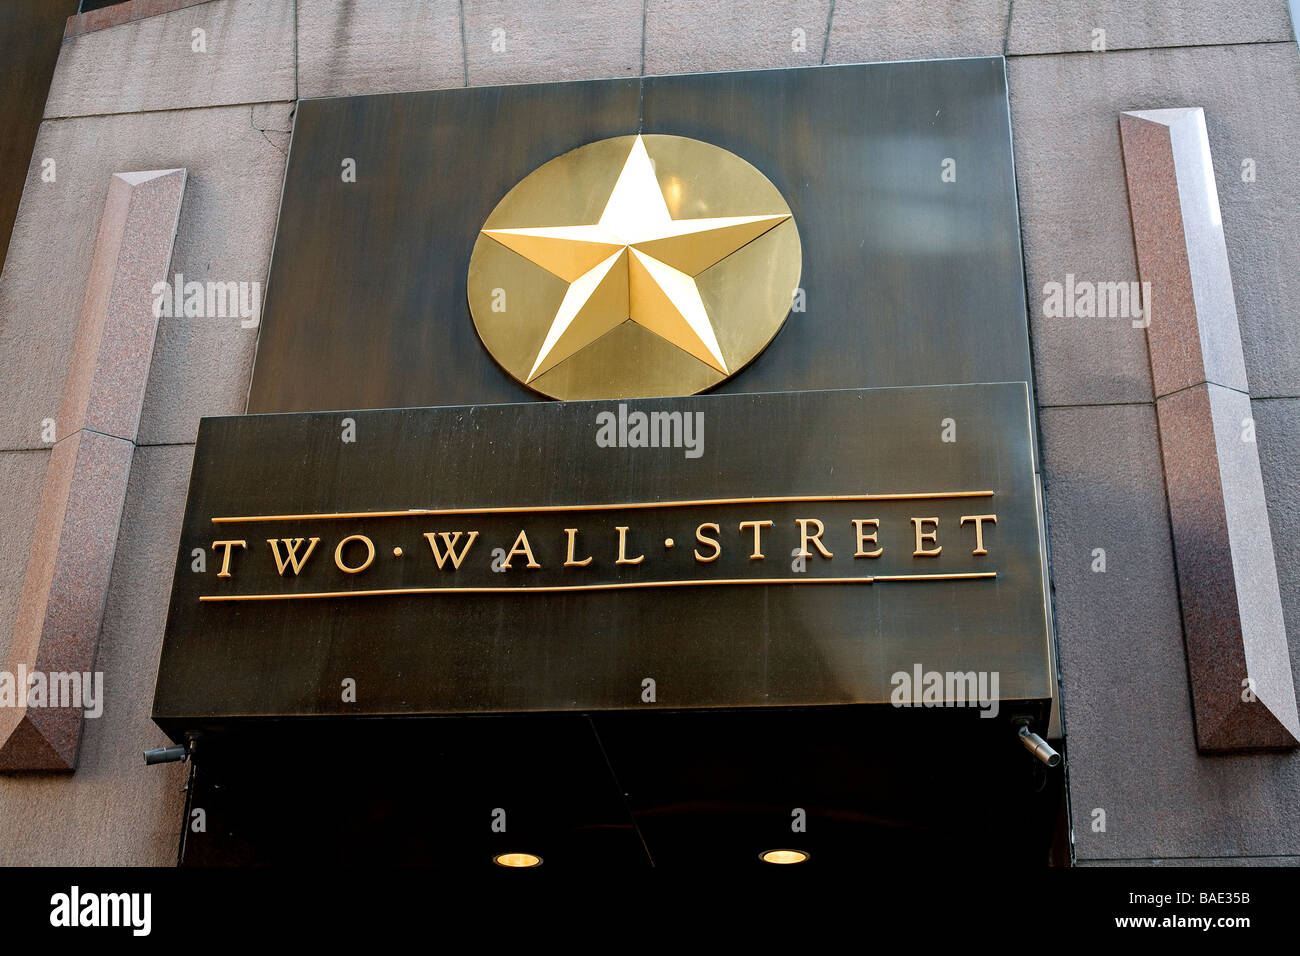 United States, New York, Wall Street, inscription and Golden Star on NYSE (New York Stock Exchange) Building Facade Stock Photo